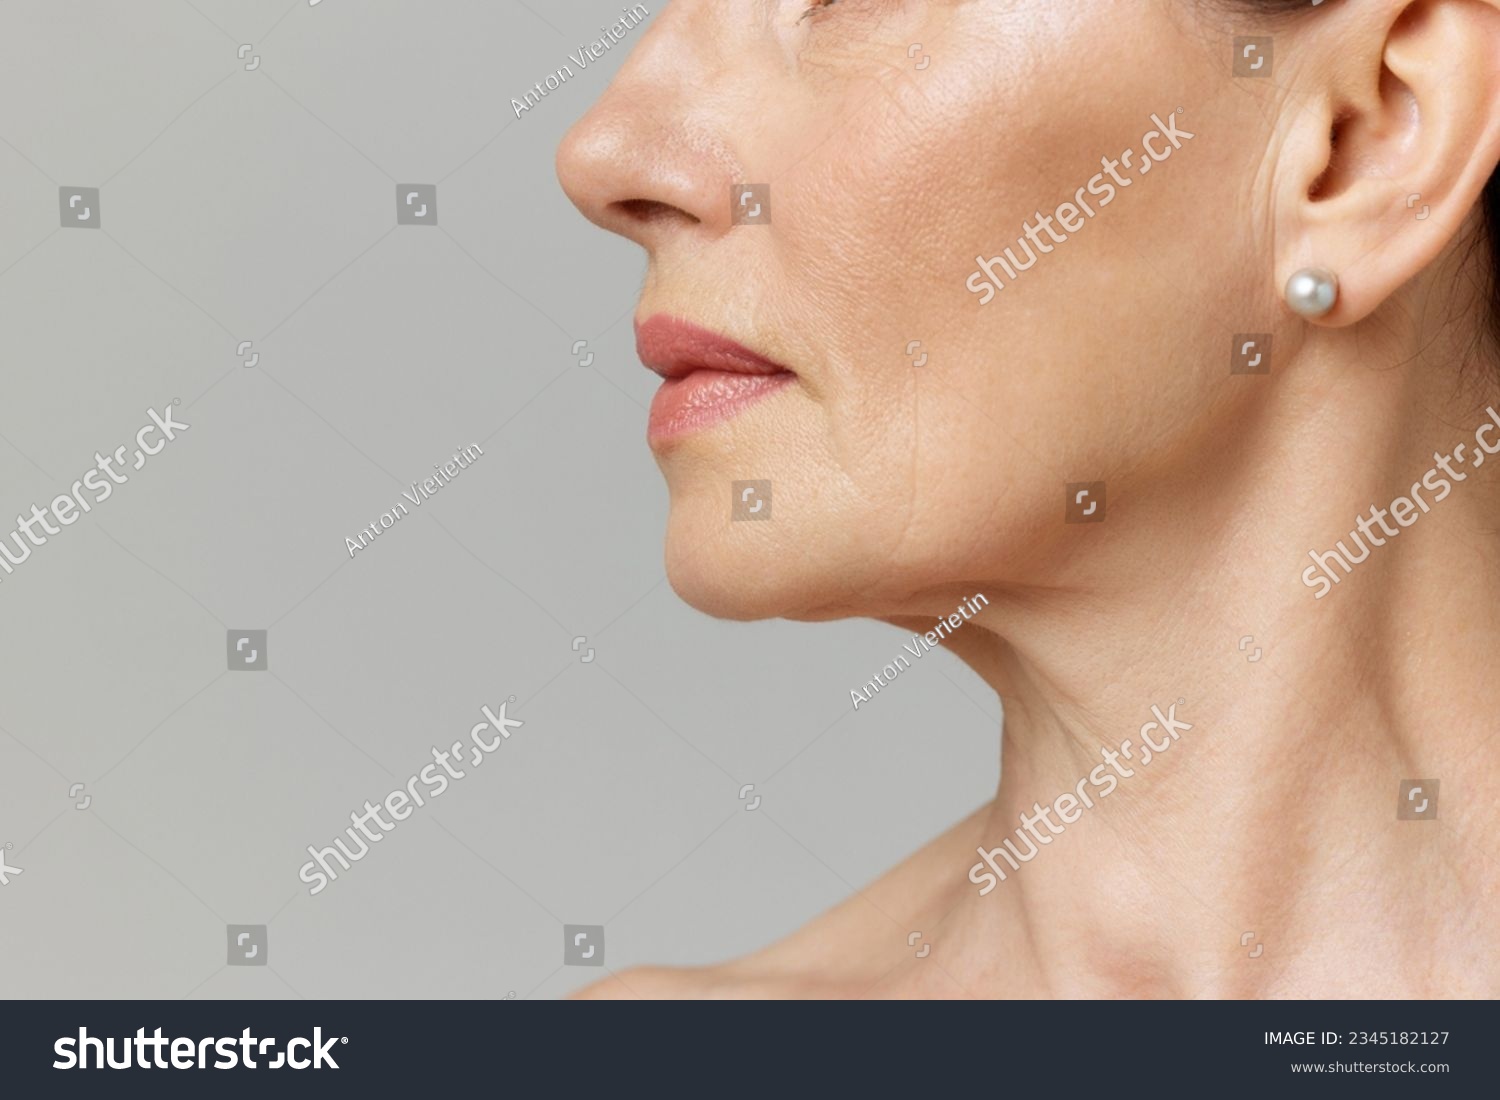 Double chin treatment. Cropped profile portrait with lips and chin neckline of middle-aged woman over grey studio background. Fashion, beauty, spa, cosmetology, skincare concept. #2345182127